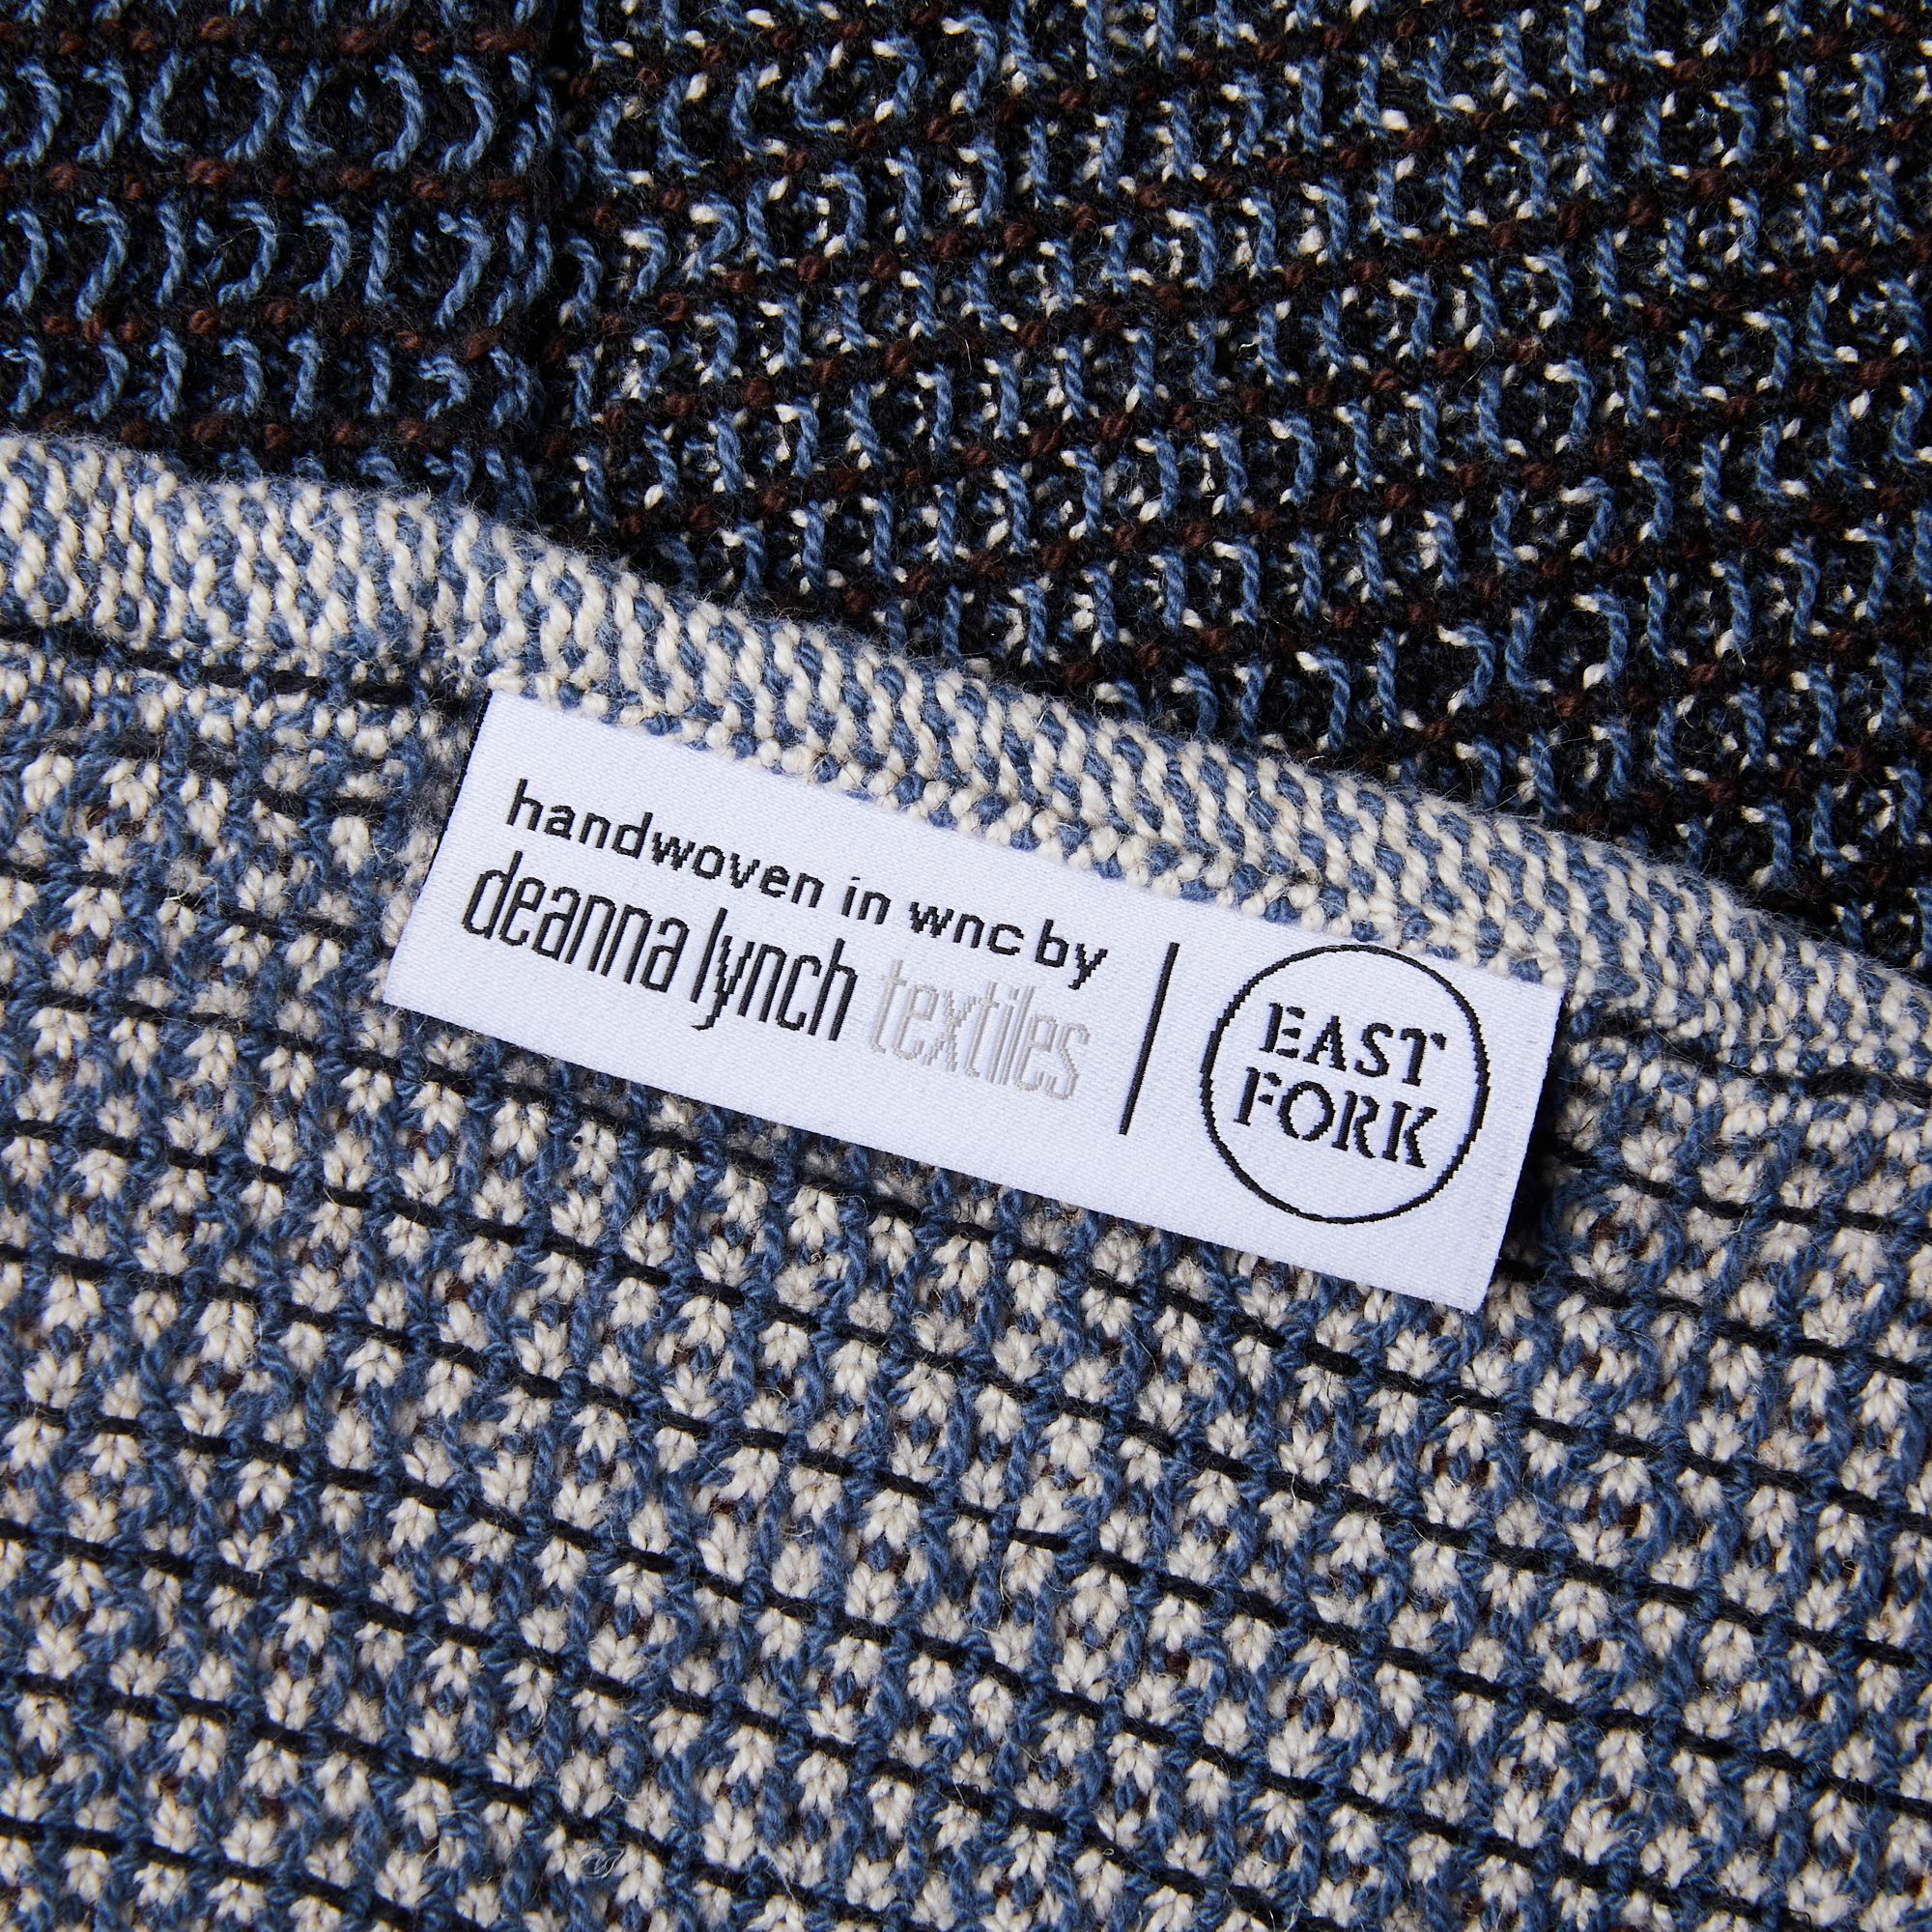 Close up of a woven blue, black, and white blanket with a white label that reads "Handwoven in WNC by Deanna Lynch Textiles" next to the East Fork logo